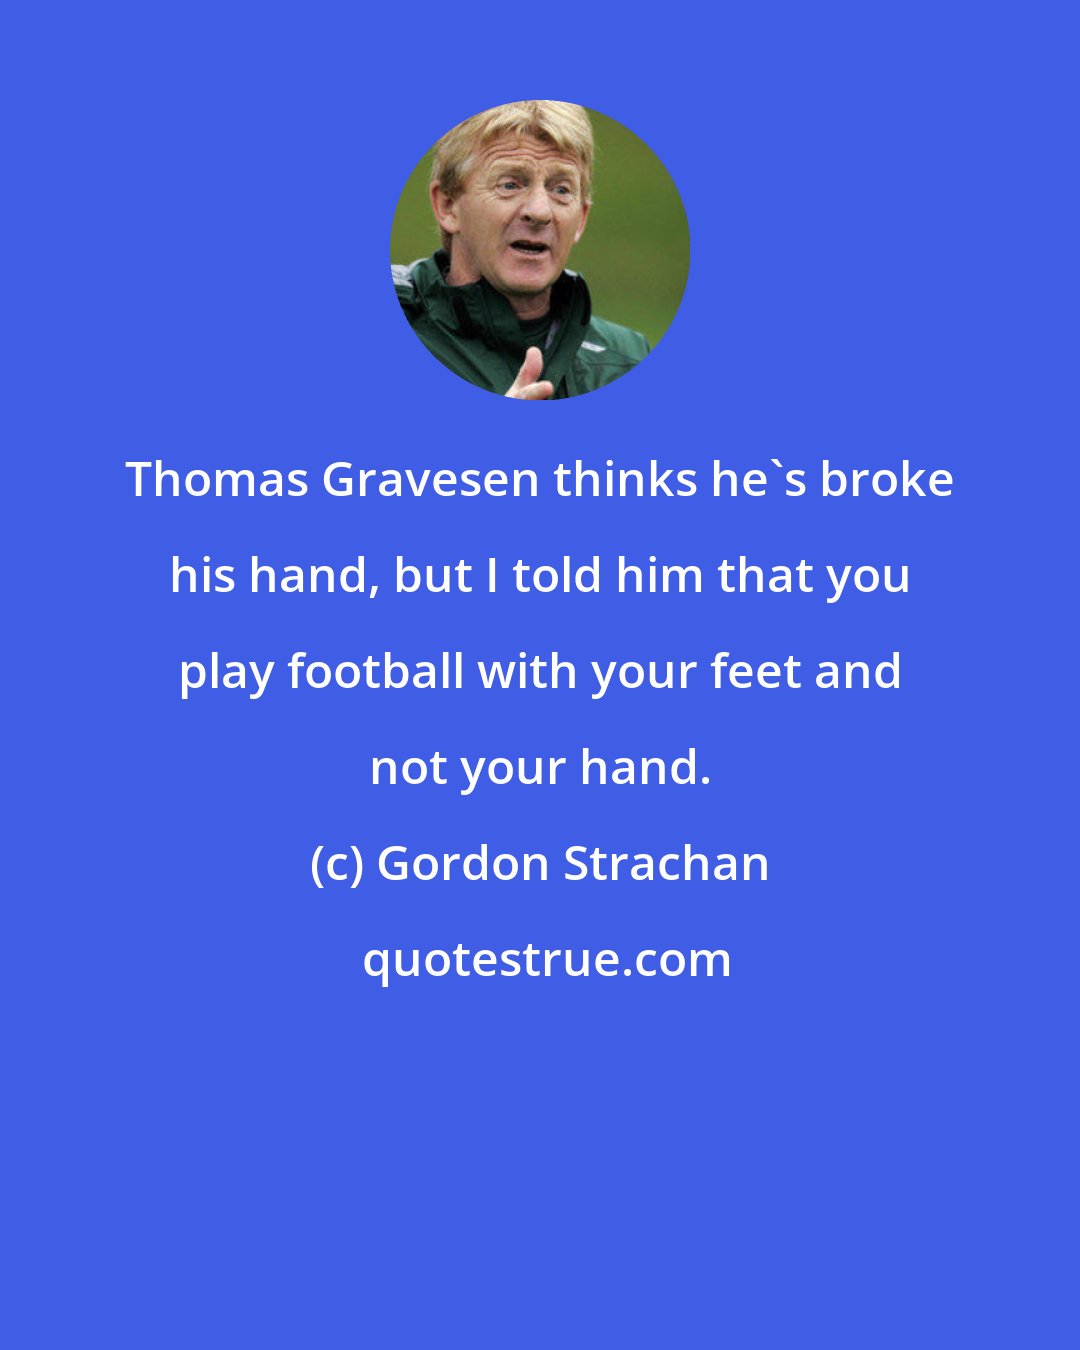 Gordon Strachan: Thomas Gravesen thinks he's broke his hand, but I told him that you play football with your feet and not your hand.